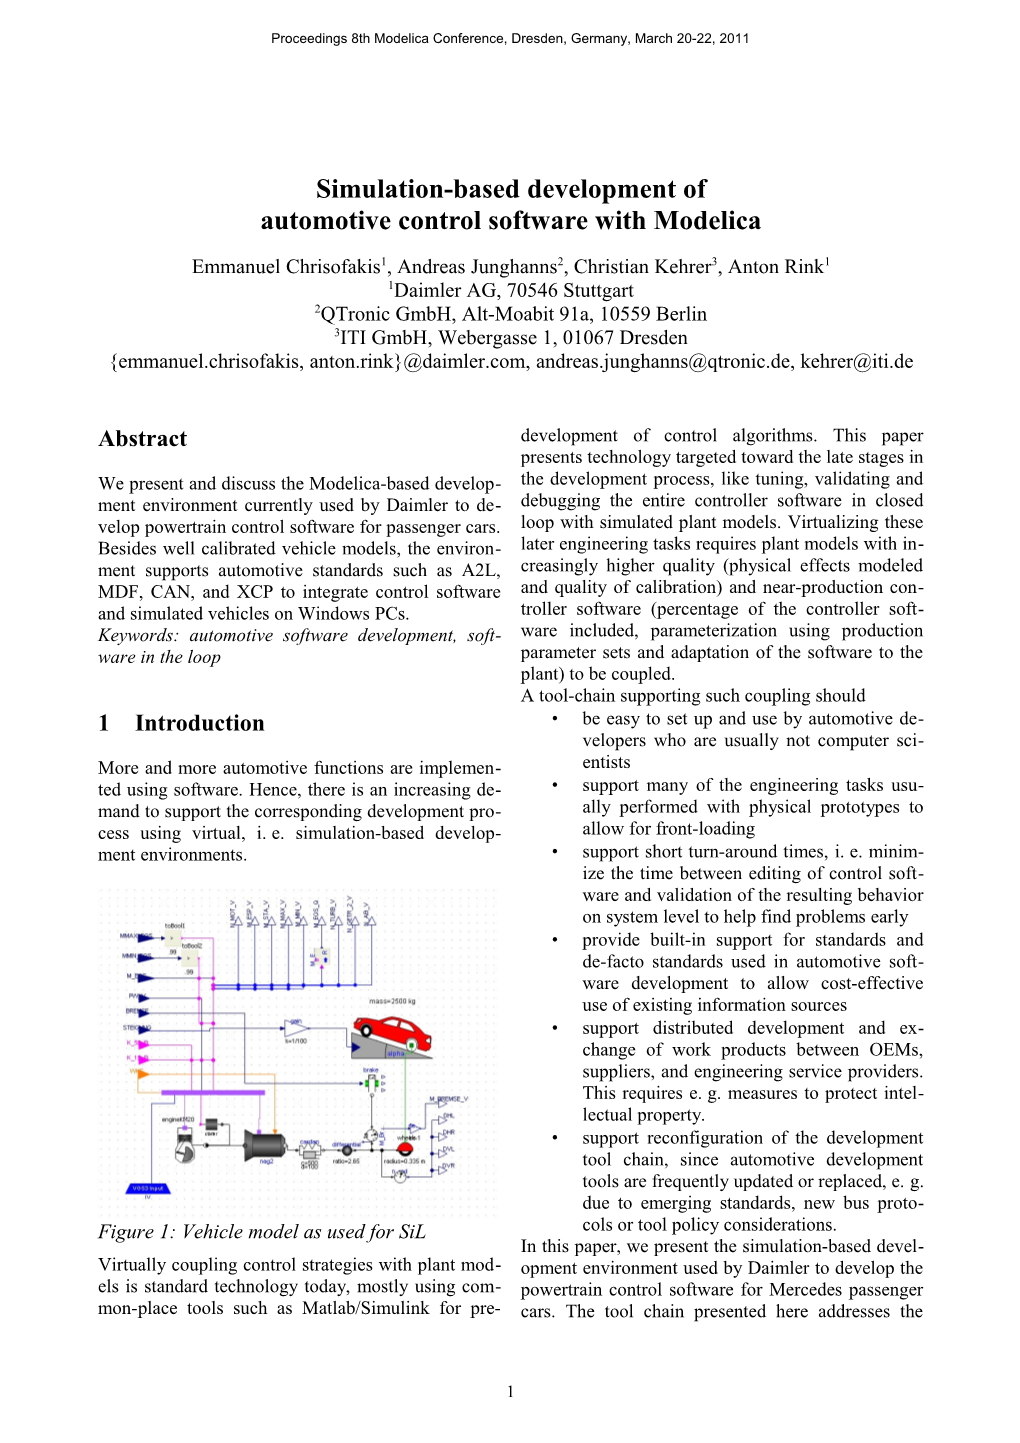 Simulation-Based Development of Automotive Control Software with Modelica